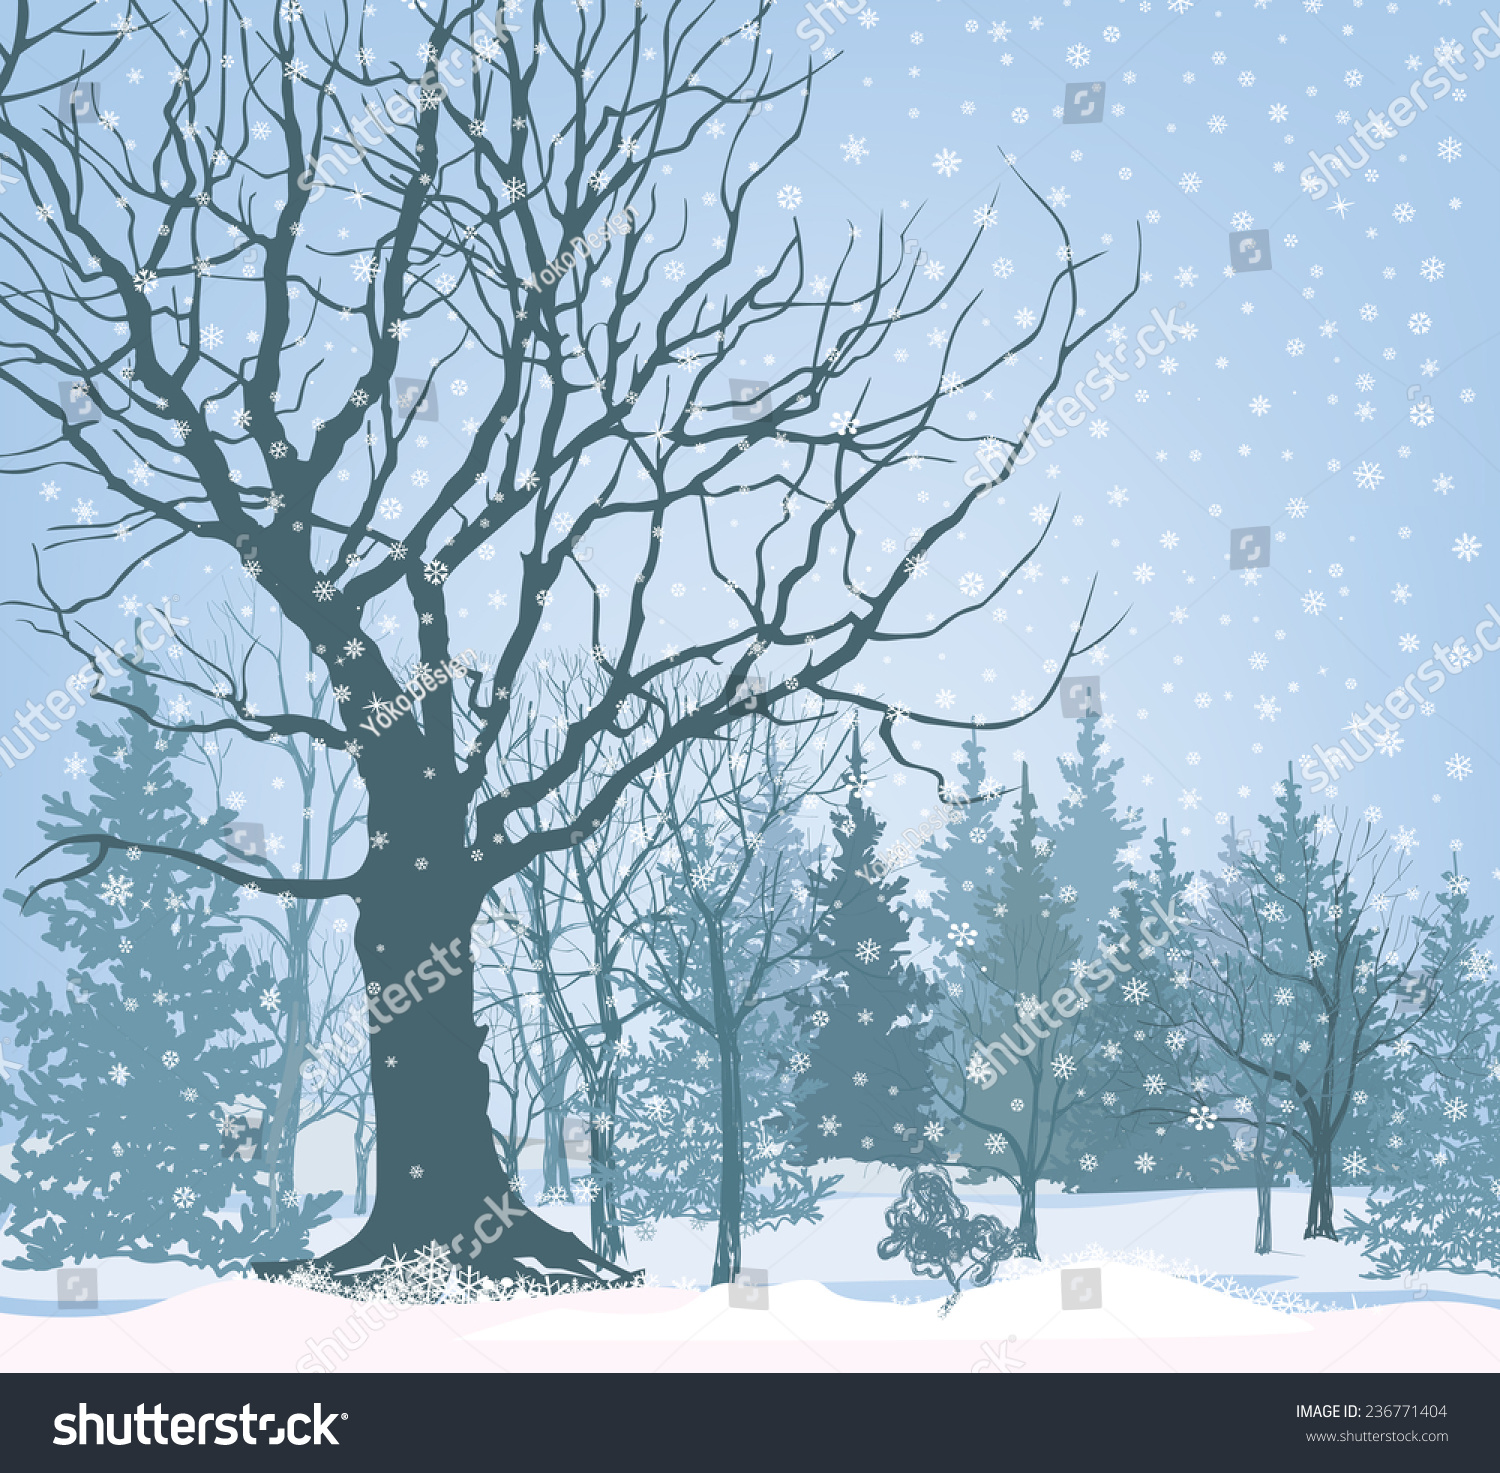 snowy forest clipart - photo #19